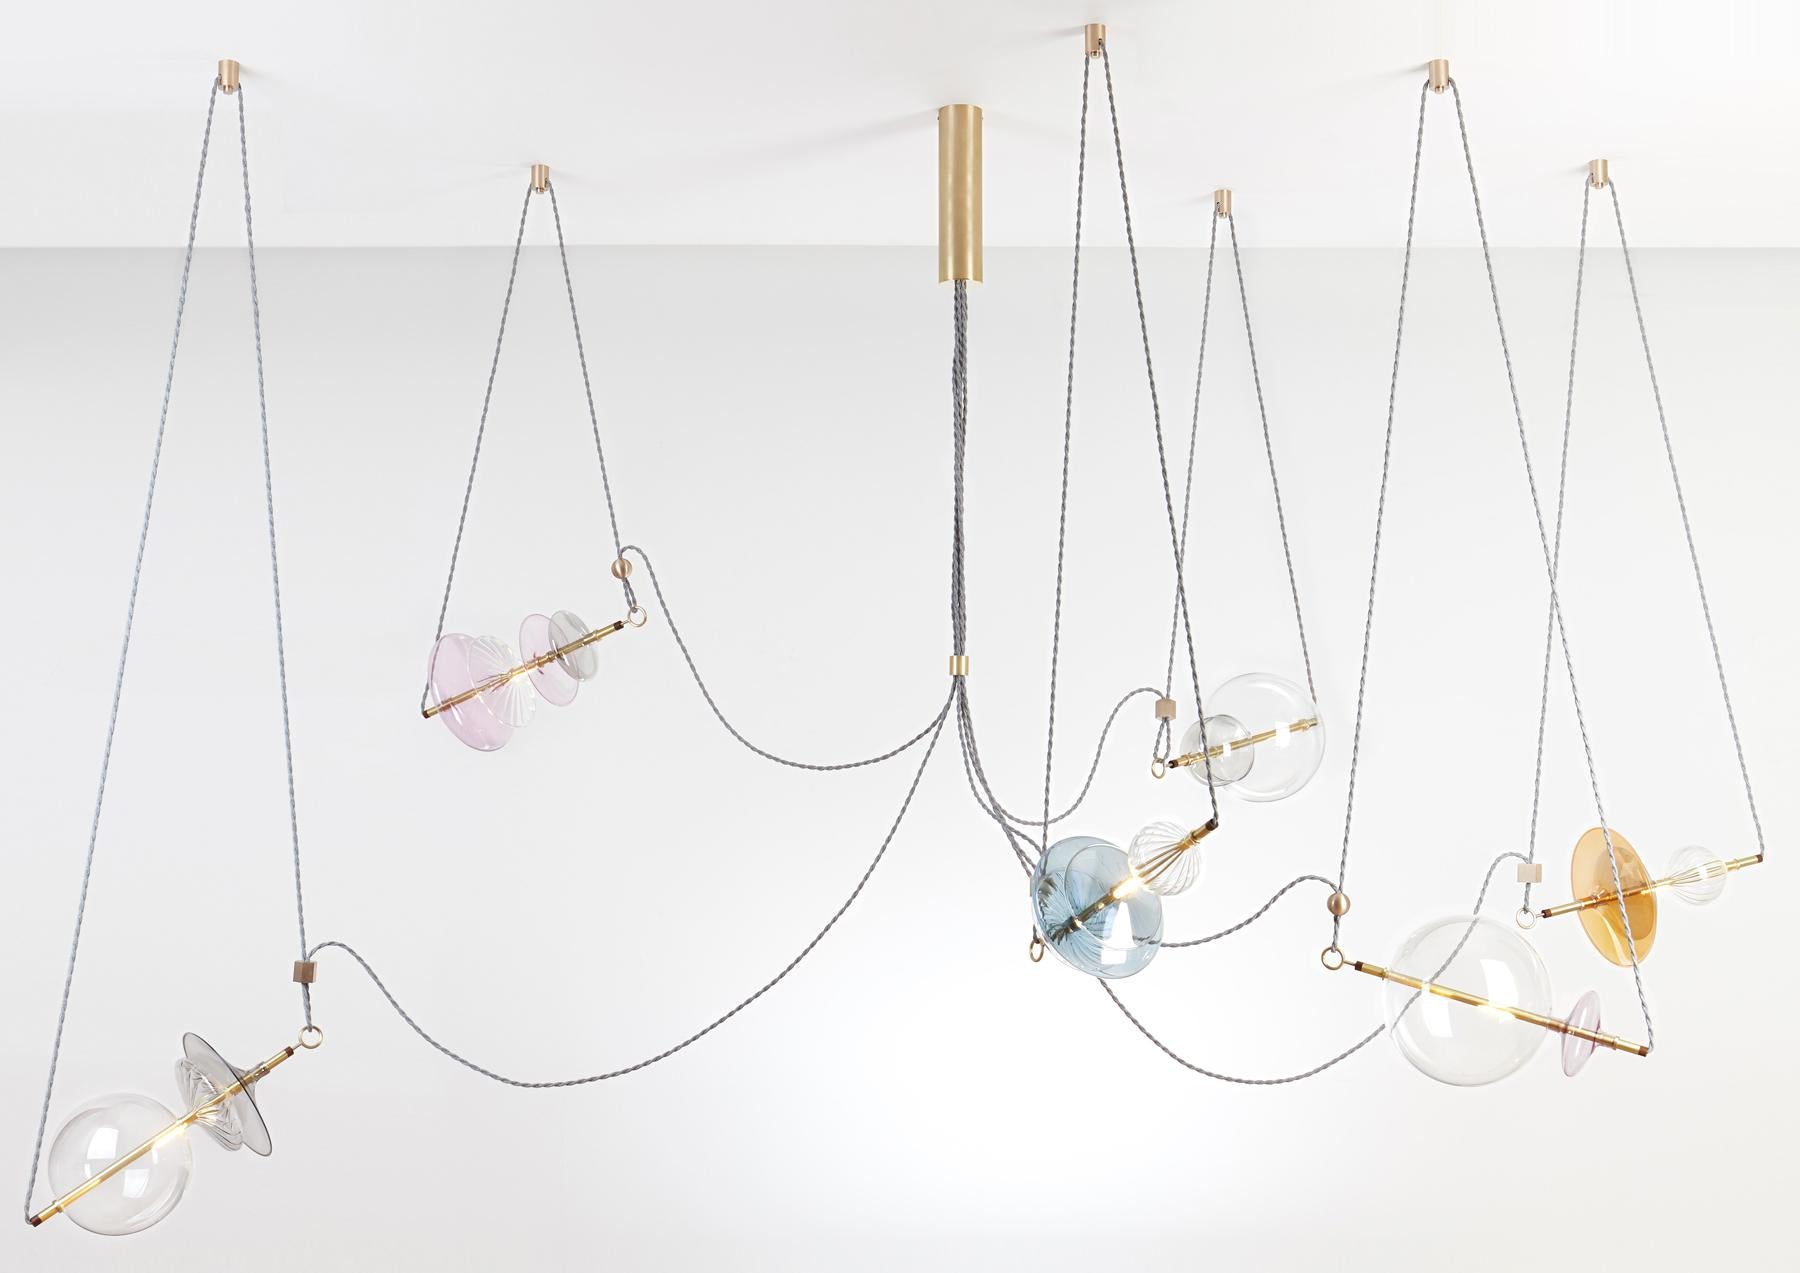 The Trapezi contemporary chandelier is inspired by the idea of a Circus Trapeze Artist.

Hand blown glass in a variety of forms and colors is combined with brass bars and hung by Linen Cords from hub units on the ceiling.
The glass is left